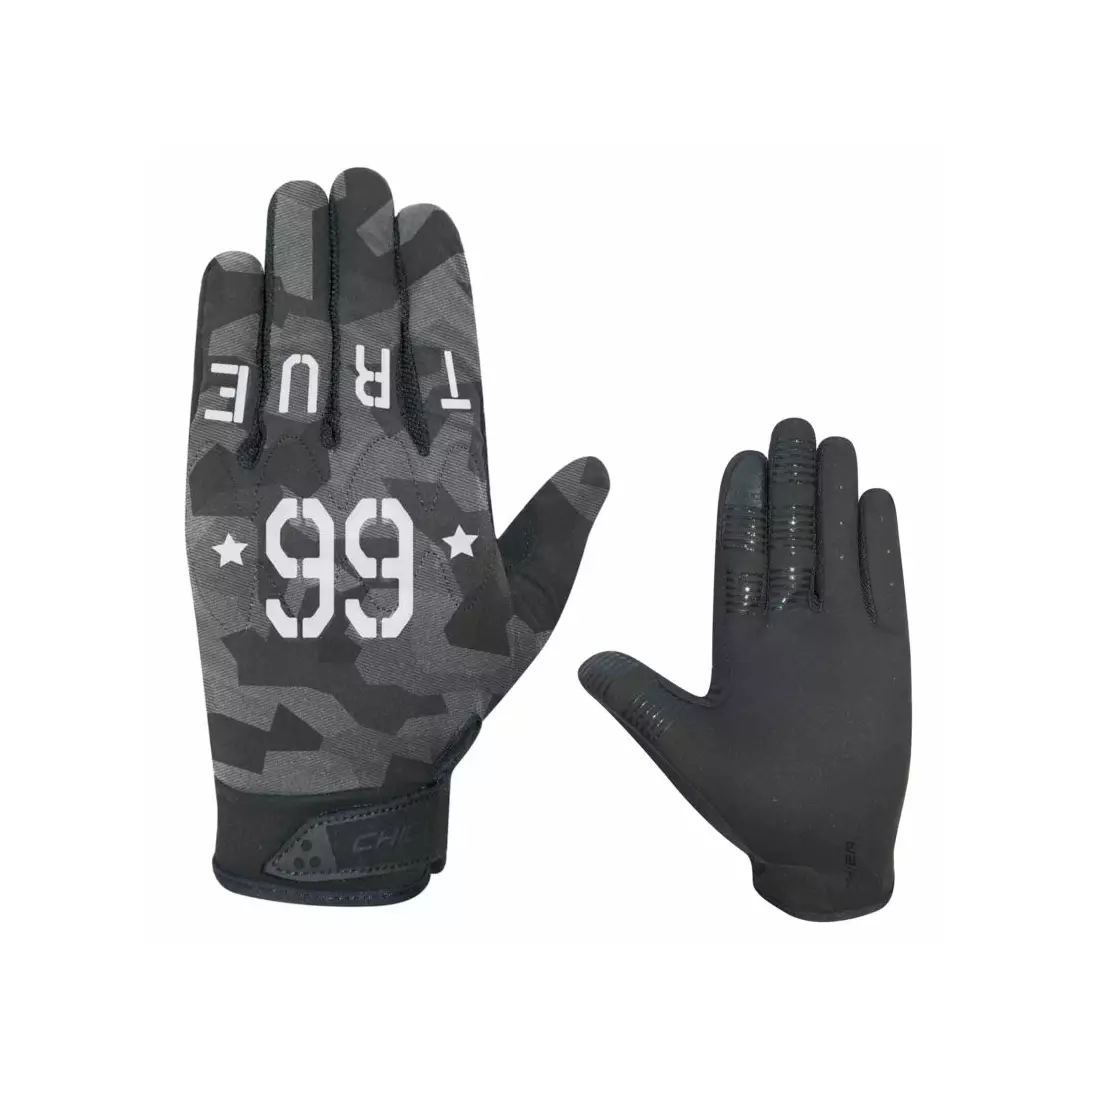 CHIBA DOUBLE SIX Bicycle gloves, grey